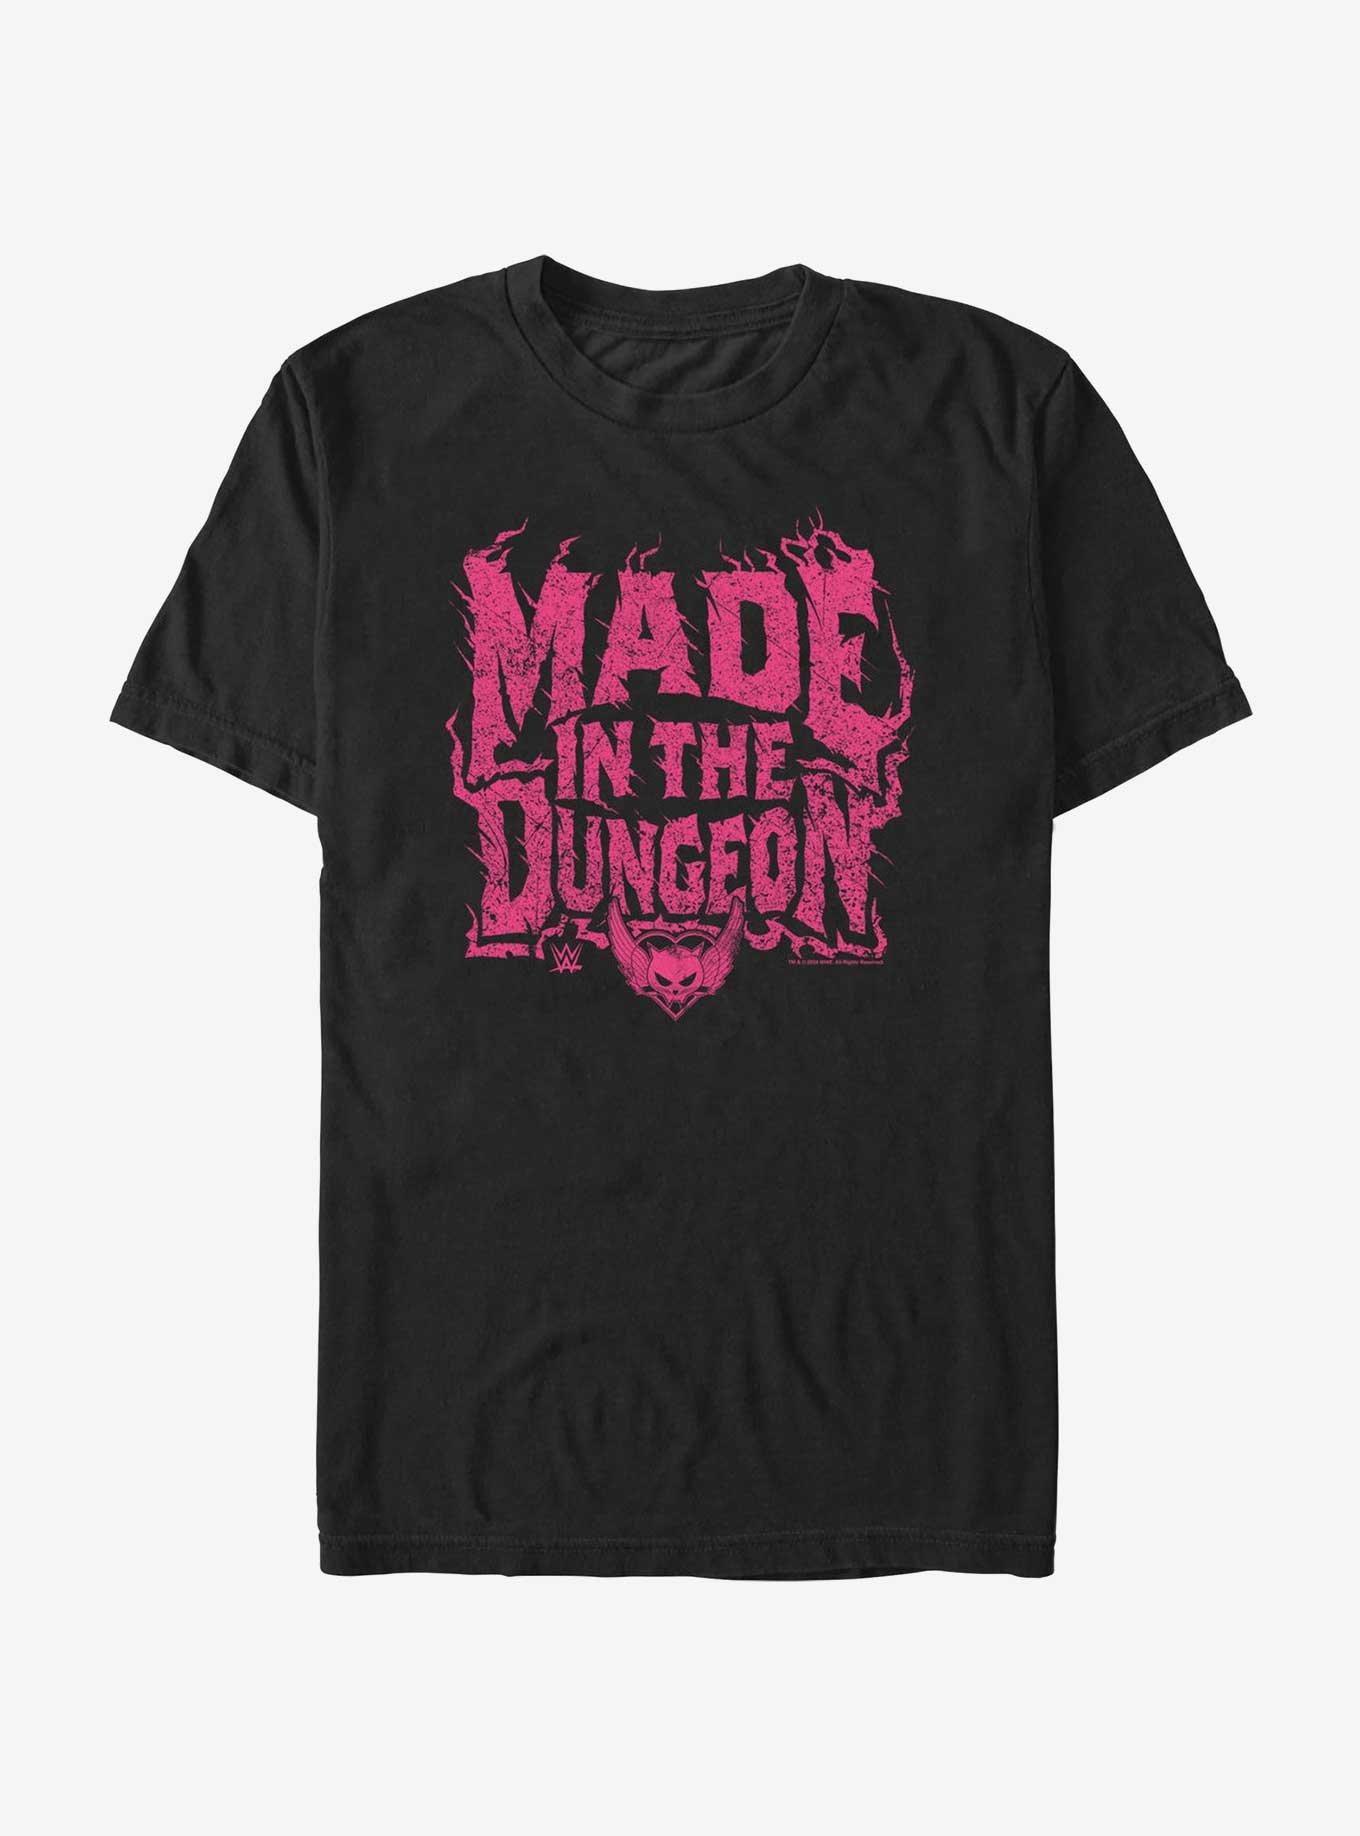 WWE Natalya Made In The Dungeon T-Shirt, , hi-res